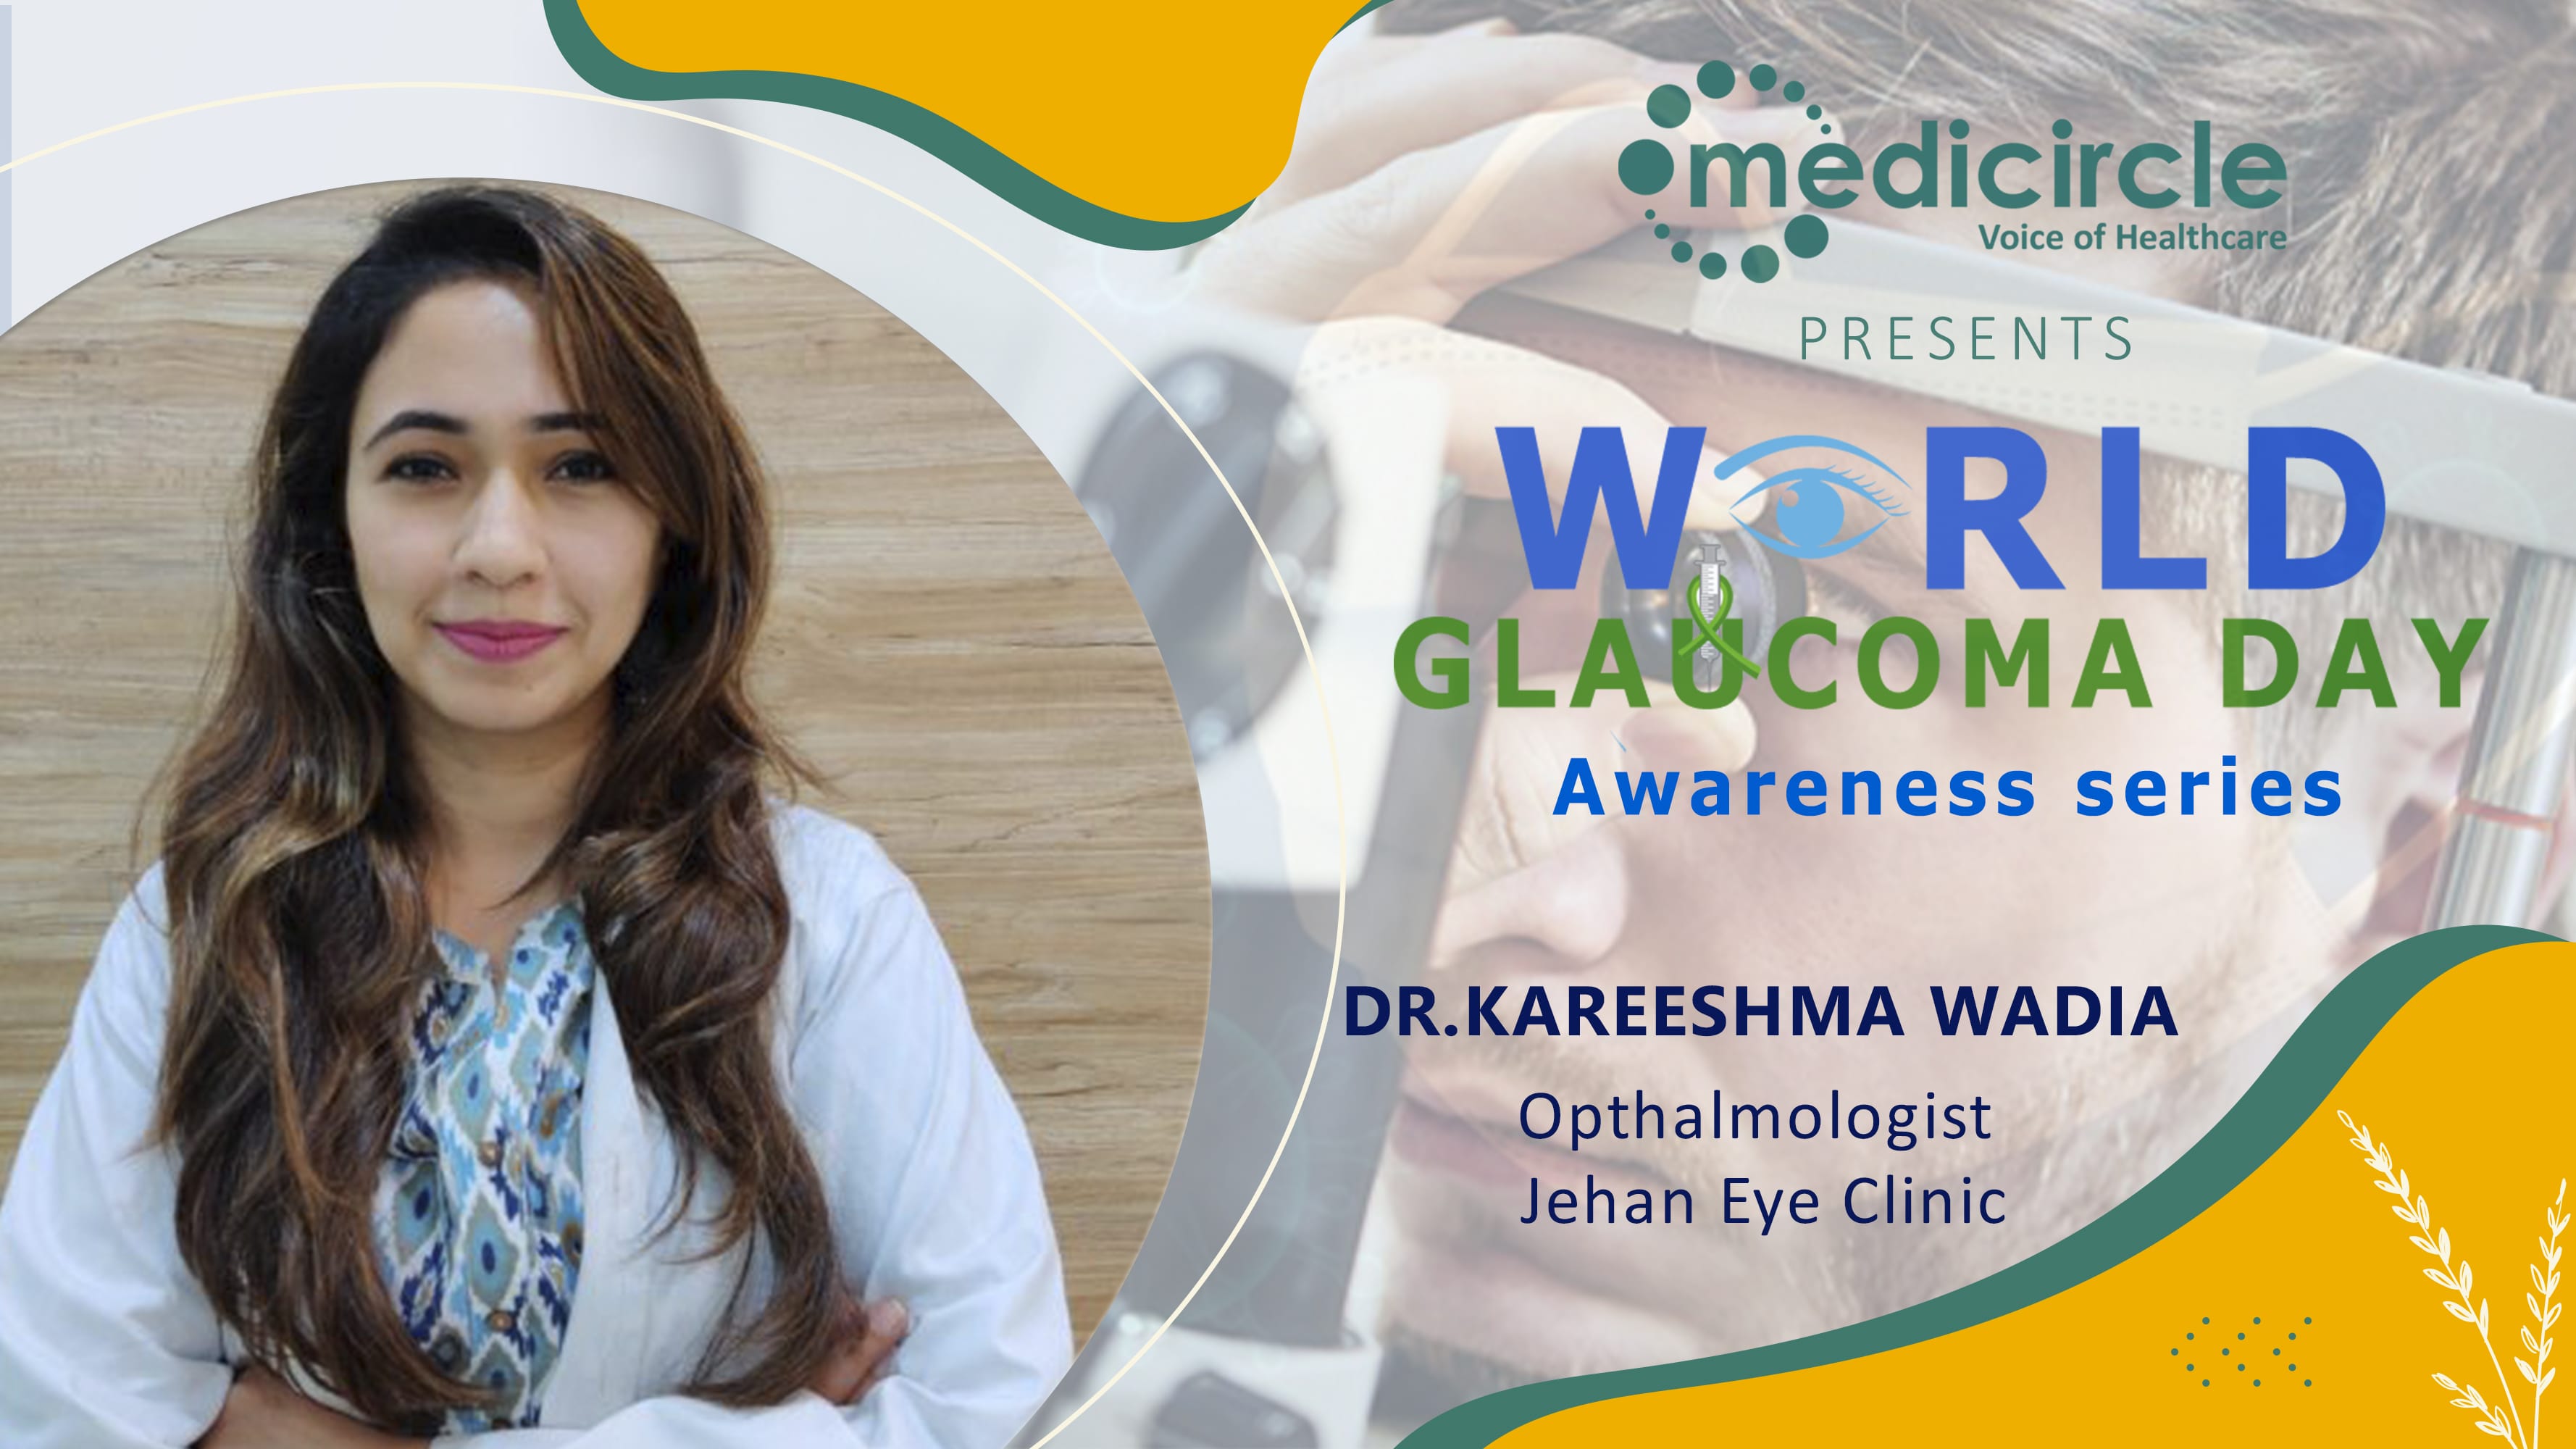 Glaucoma is controllable but the damage is not reversible